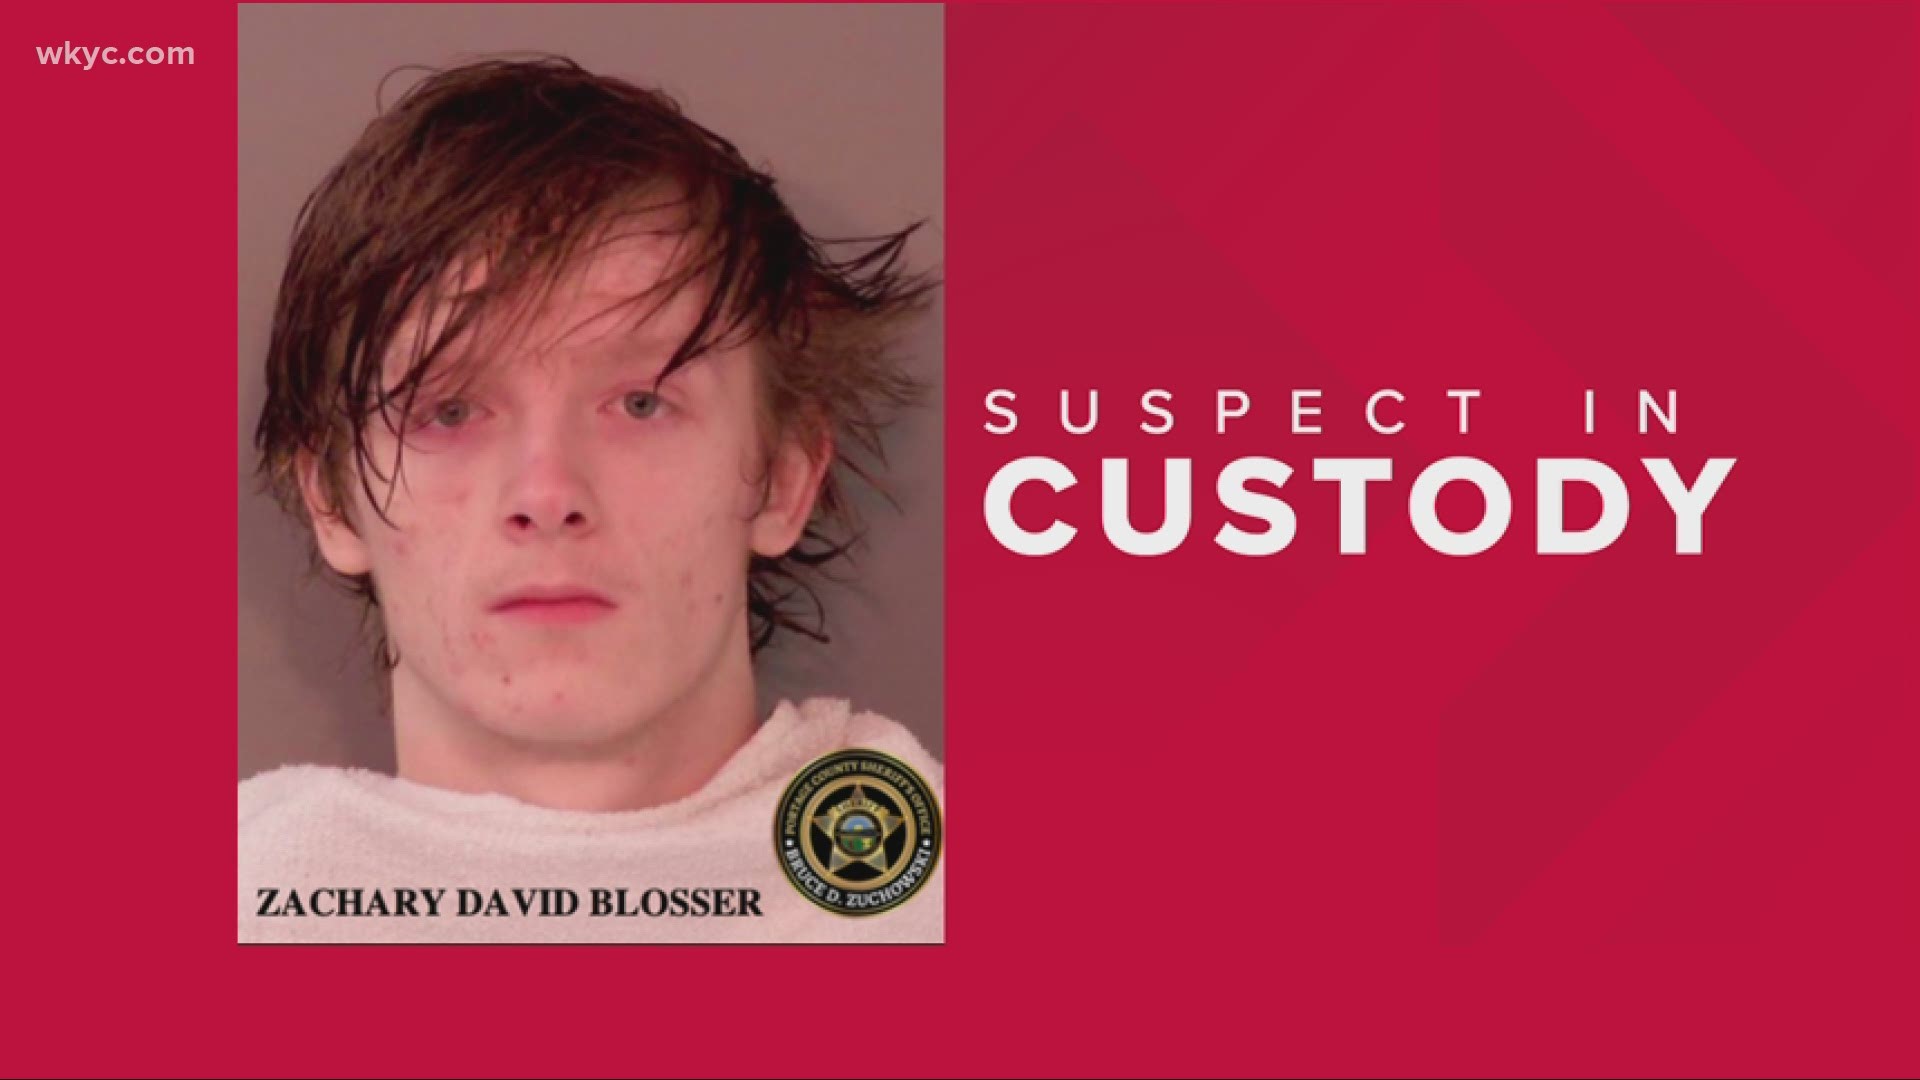 After initially being brought in for questioning, 18-year-old Zachary David Blosser was arrested.